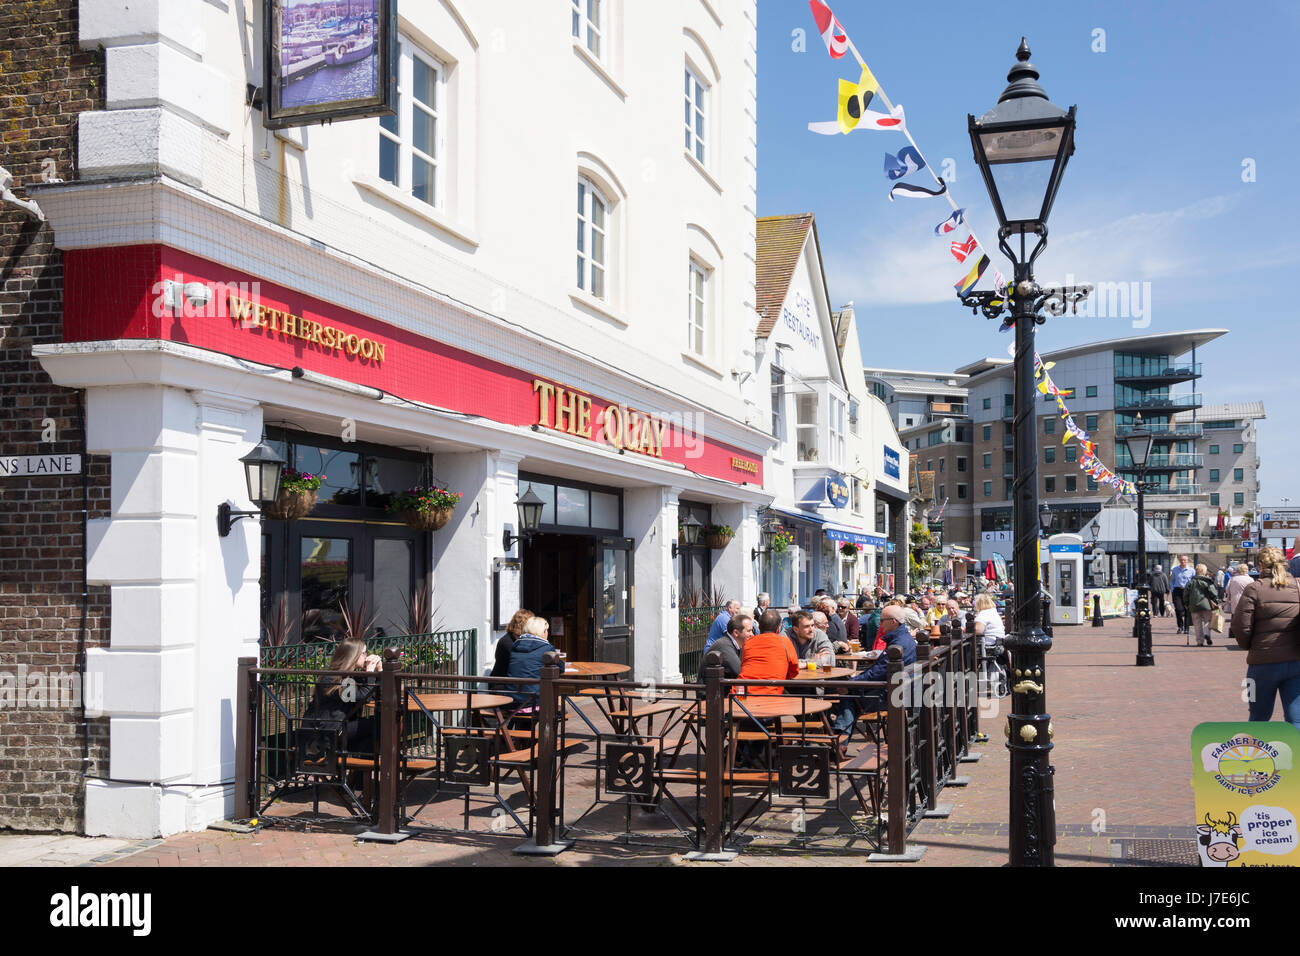 The Quay Wetherspoon Pub on seafront, Town Quay, Poole, Dorset, England, United Kingdom Stock Photo